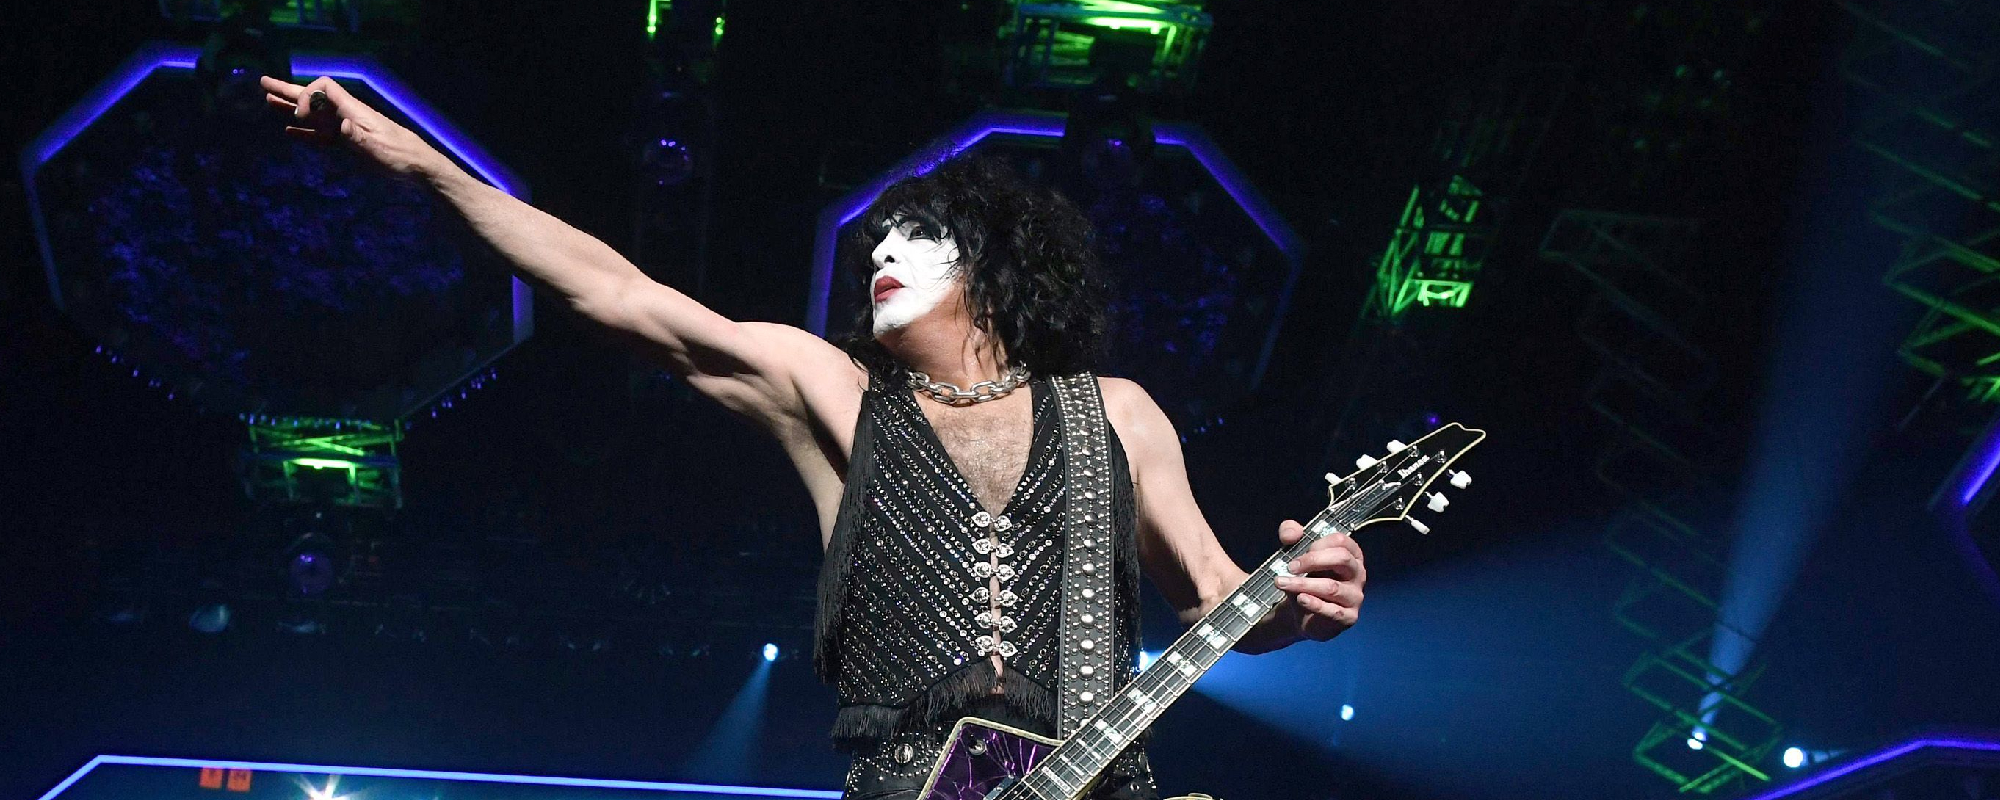 Paul Stanley Details the Frustration Surrounding Unrealistic Expectations of New KISS Albums